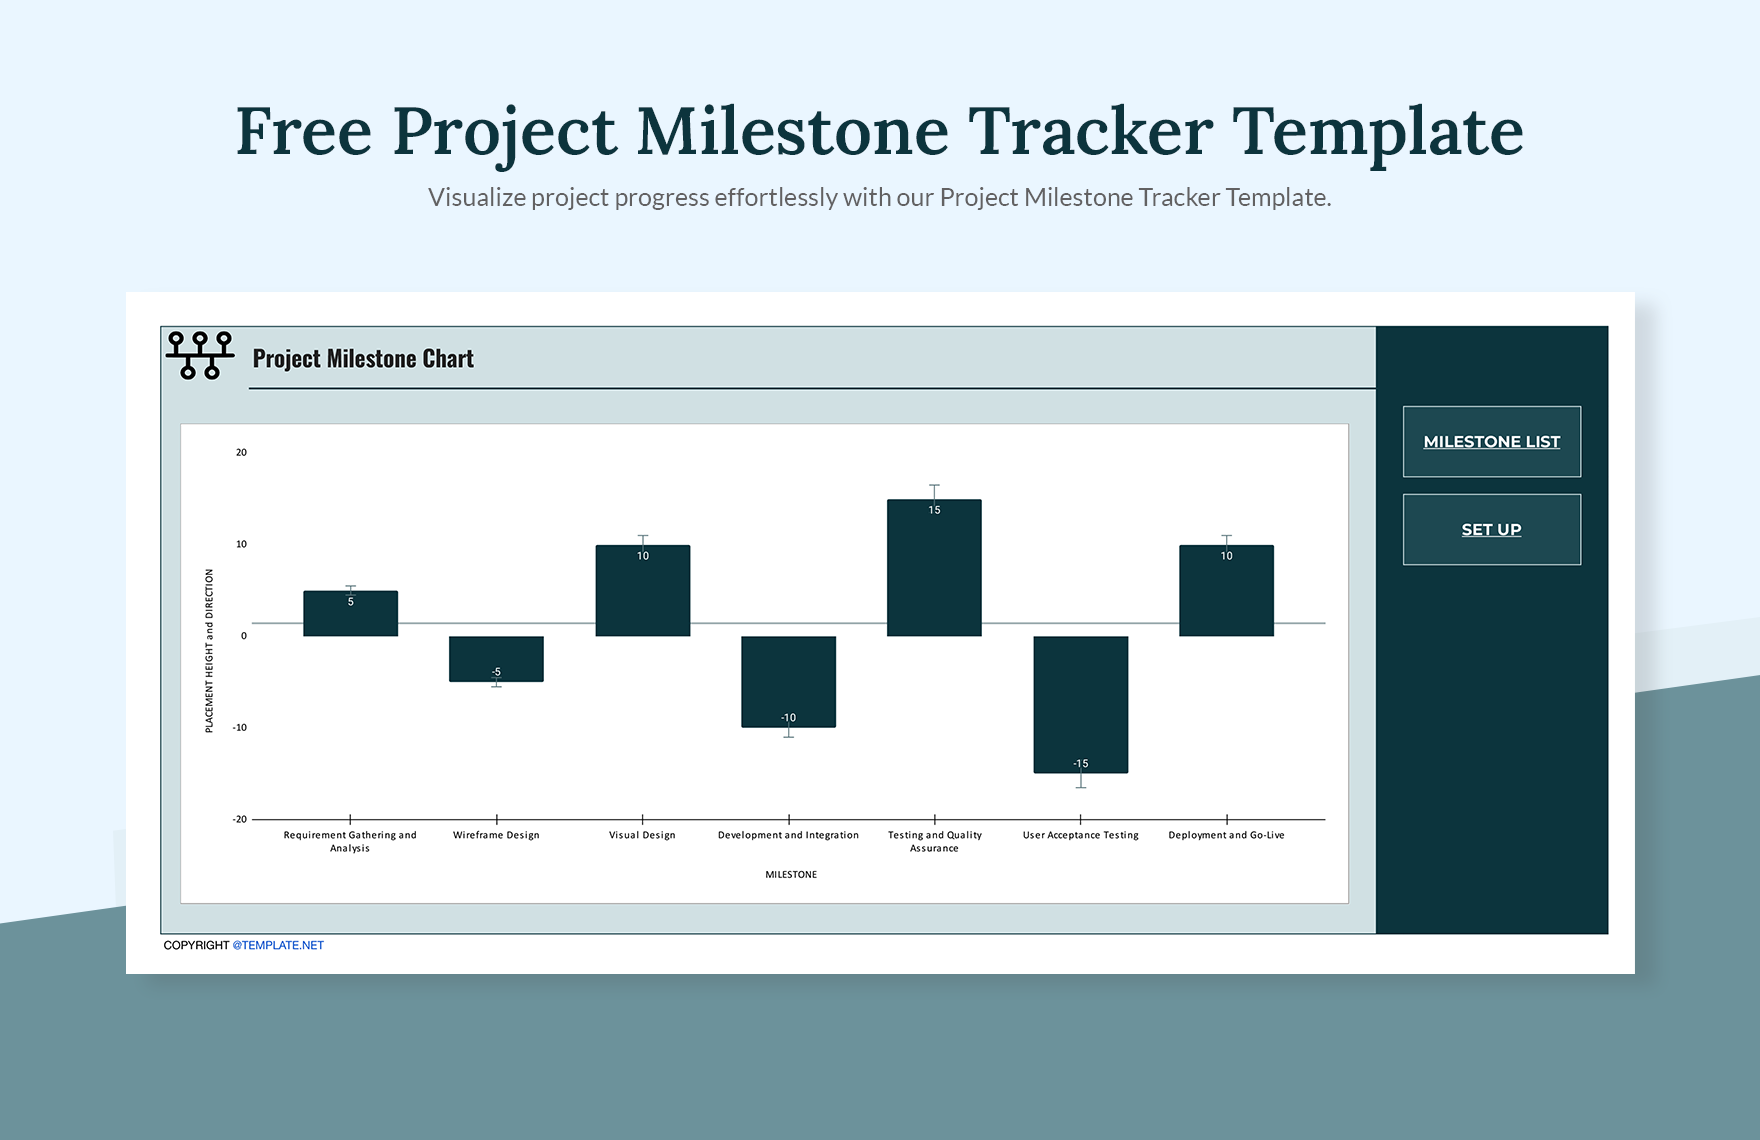 Free Project Milestone Tracker Template in Excel, Google Sheets